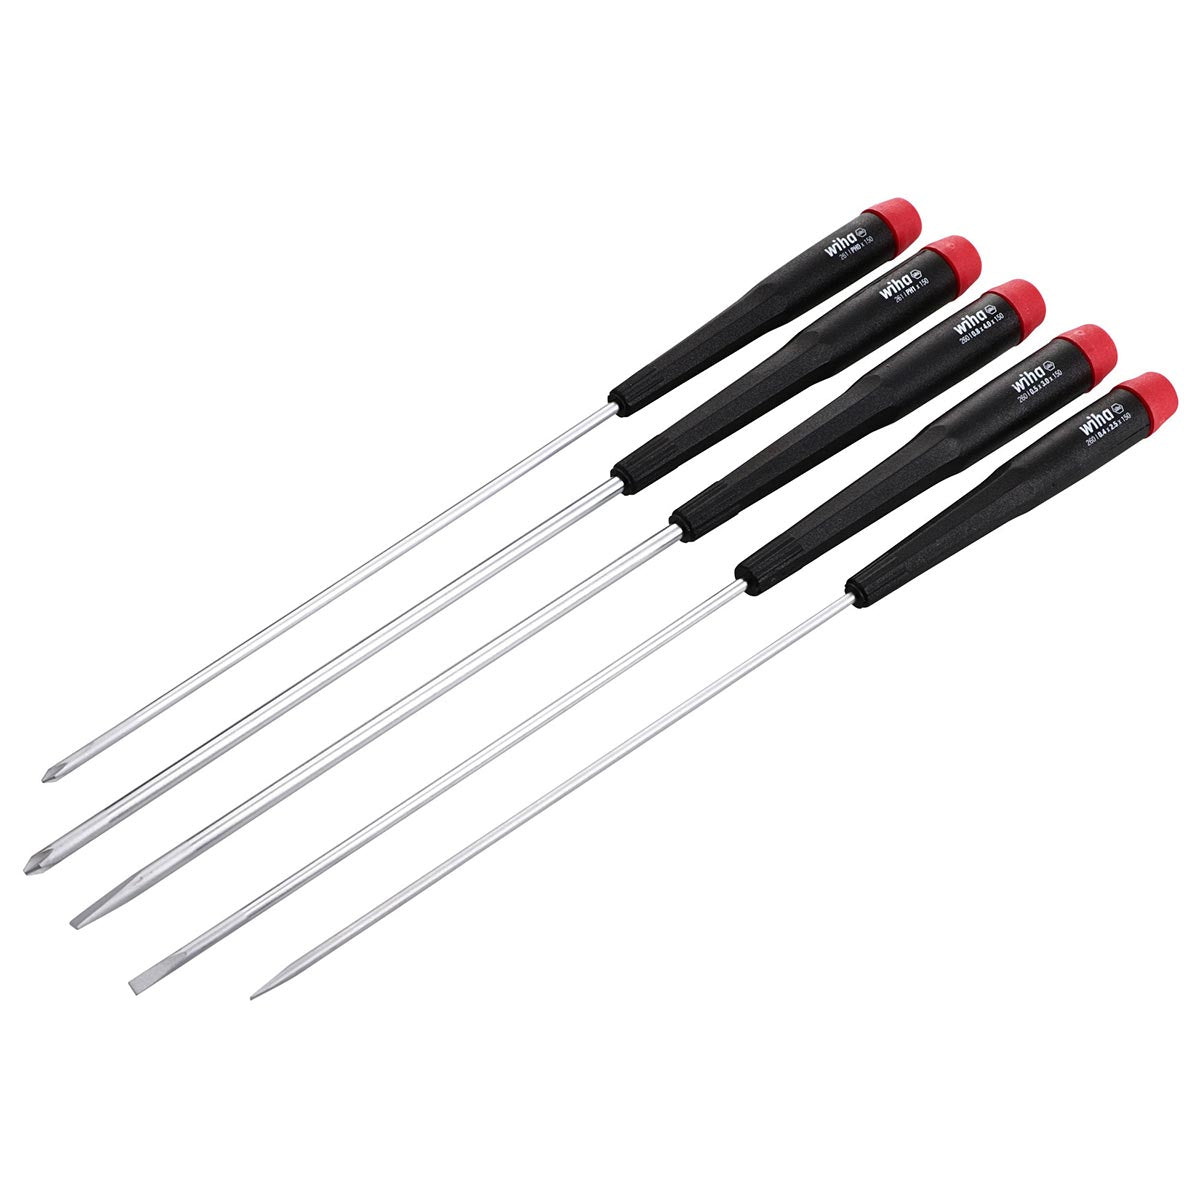 Wiha Precision Long Slotted/phillips Screwdrivers (5 Piece Set)